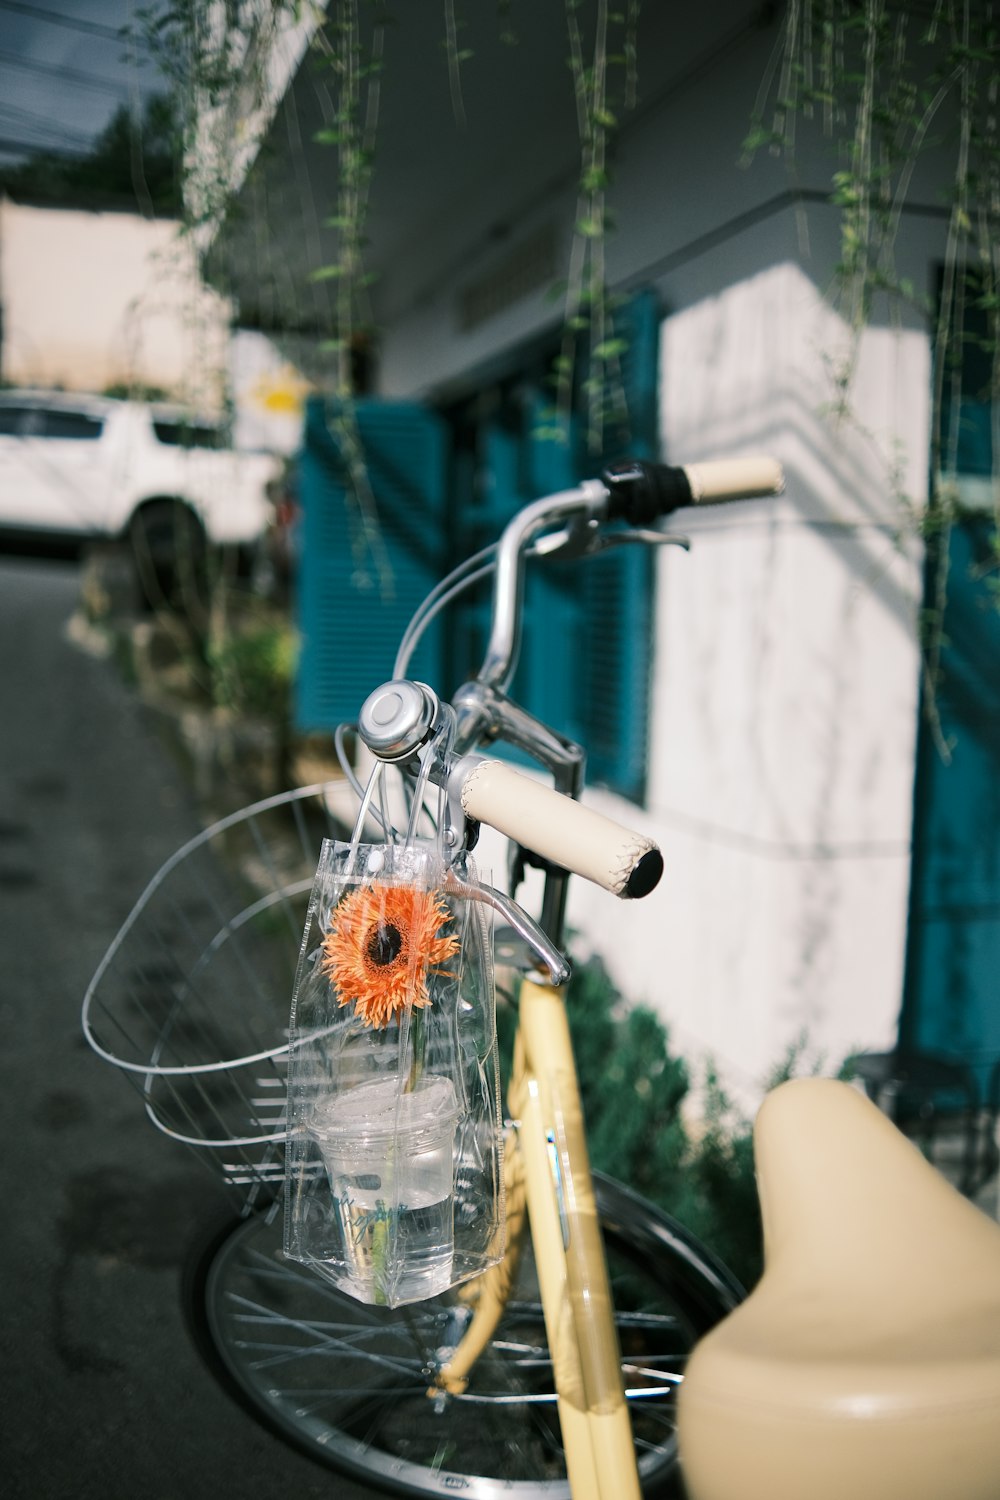 a close up of a bicycle with a flower in the basket